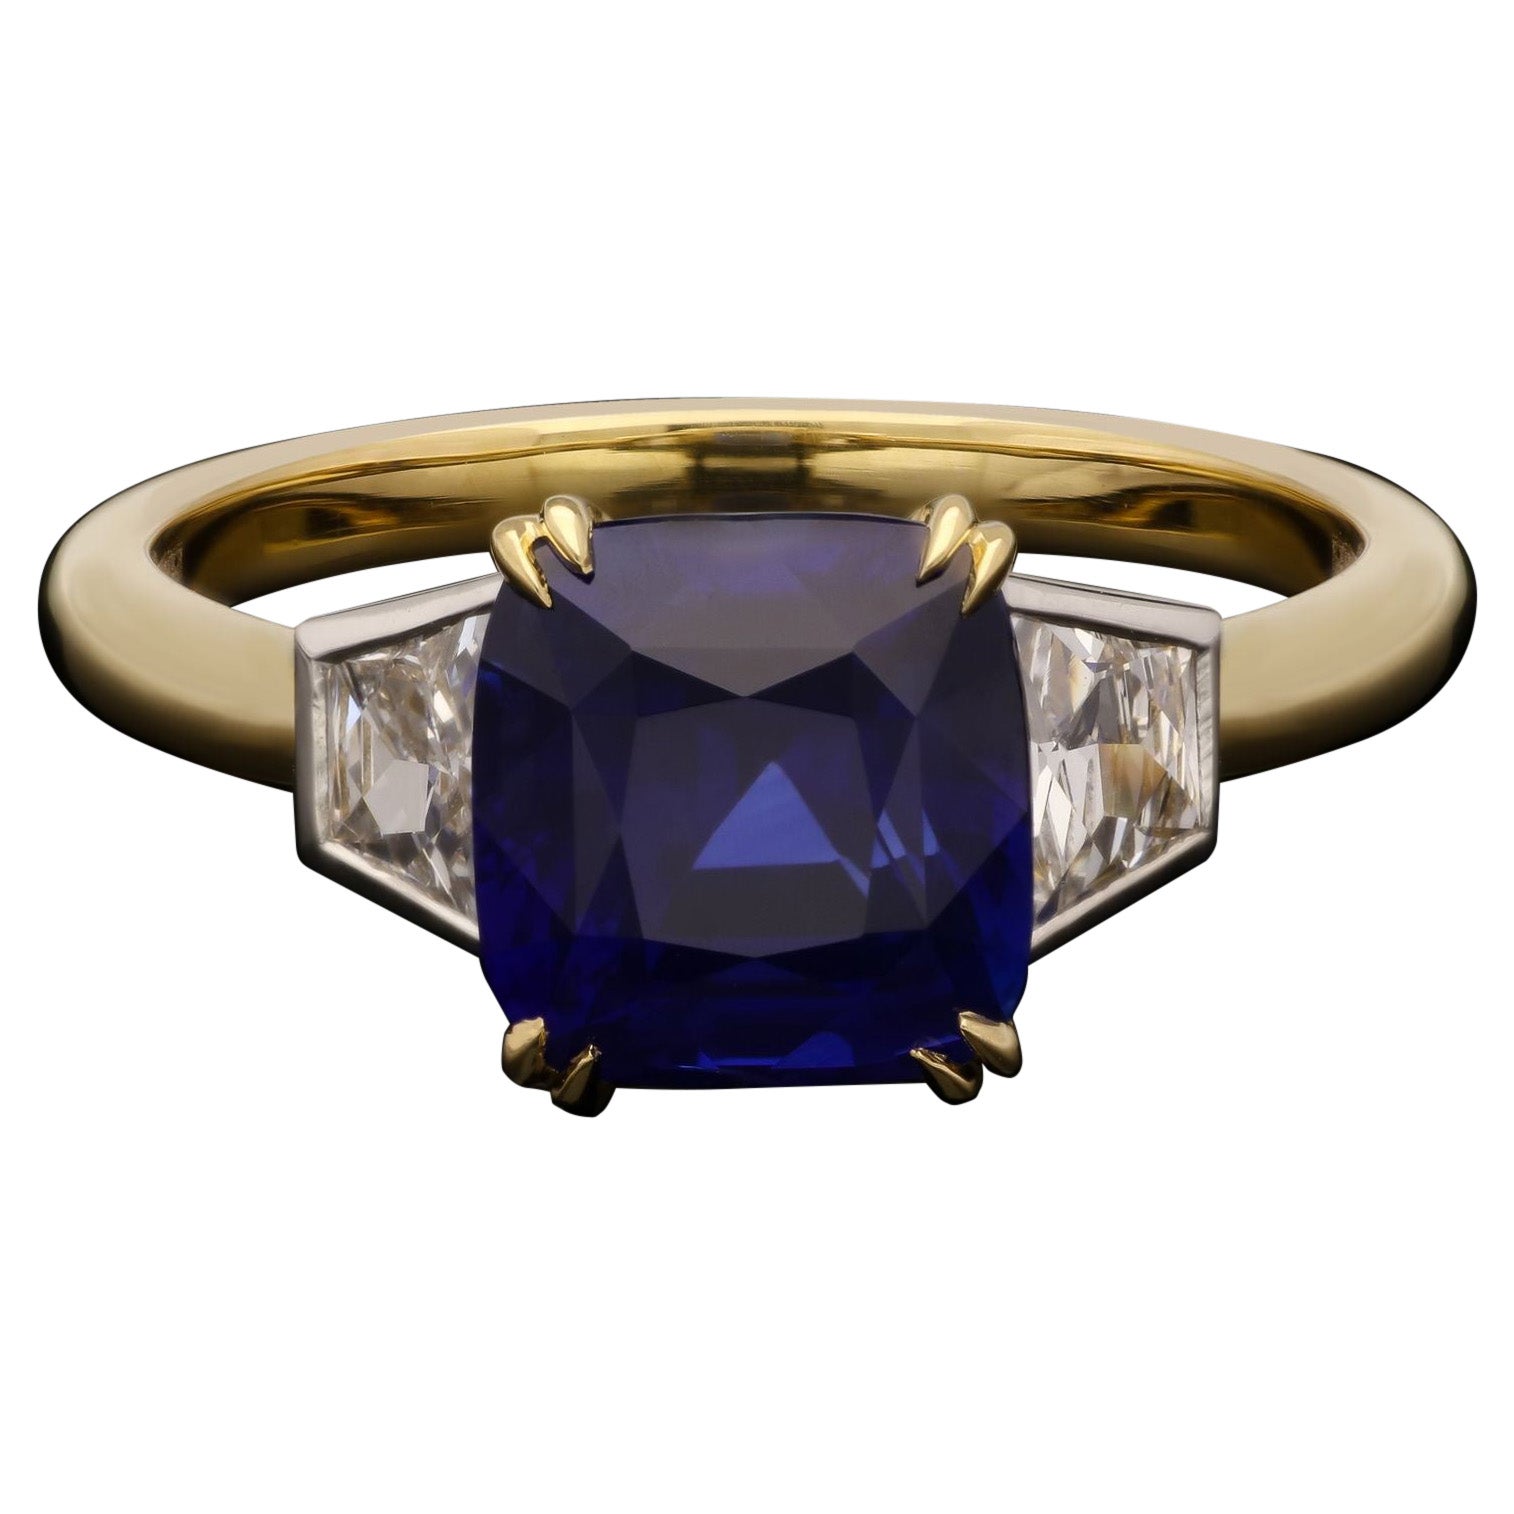 Hancocks 3.54ct Cushion Sapphire Ring with French Cut Diamond Shoulders For Sale